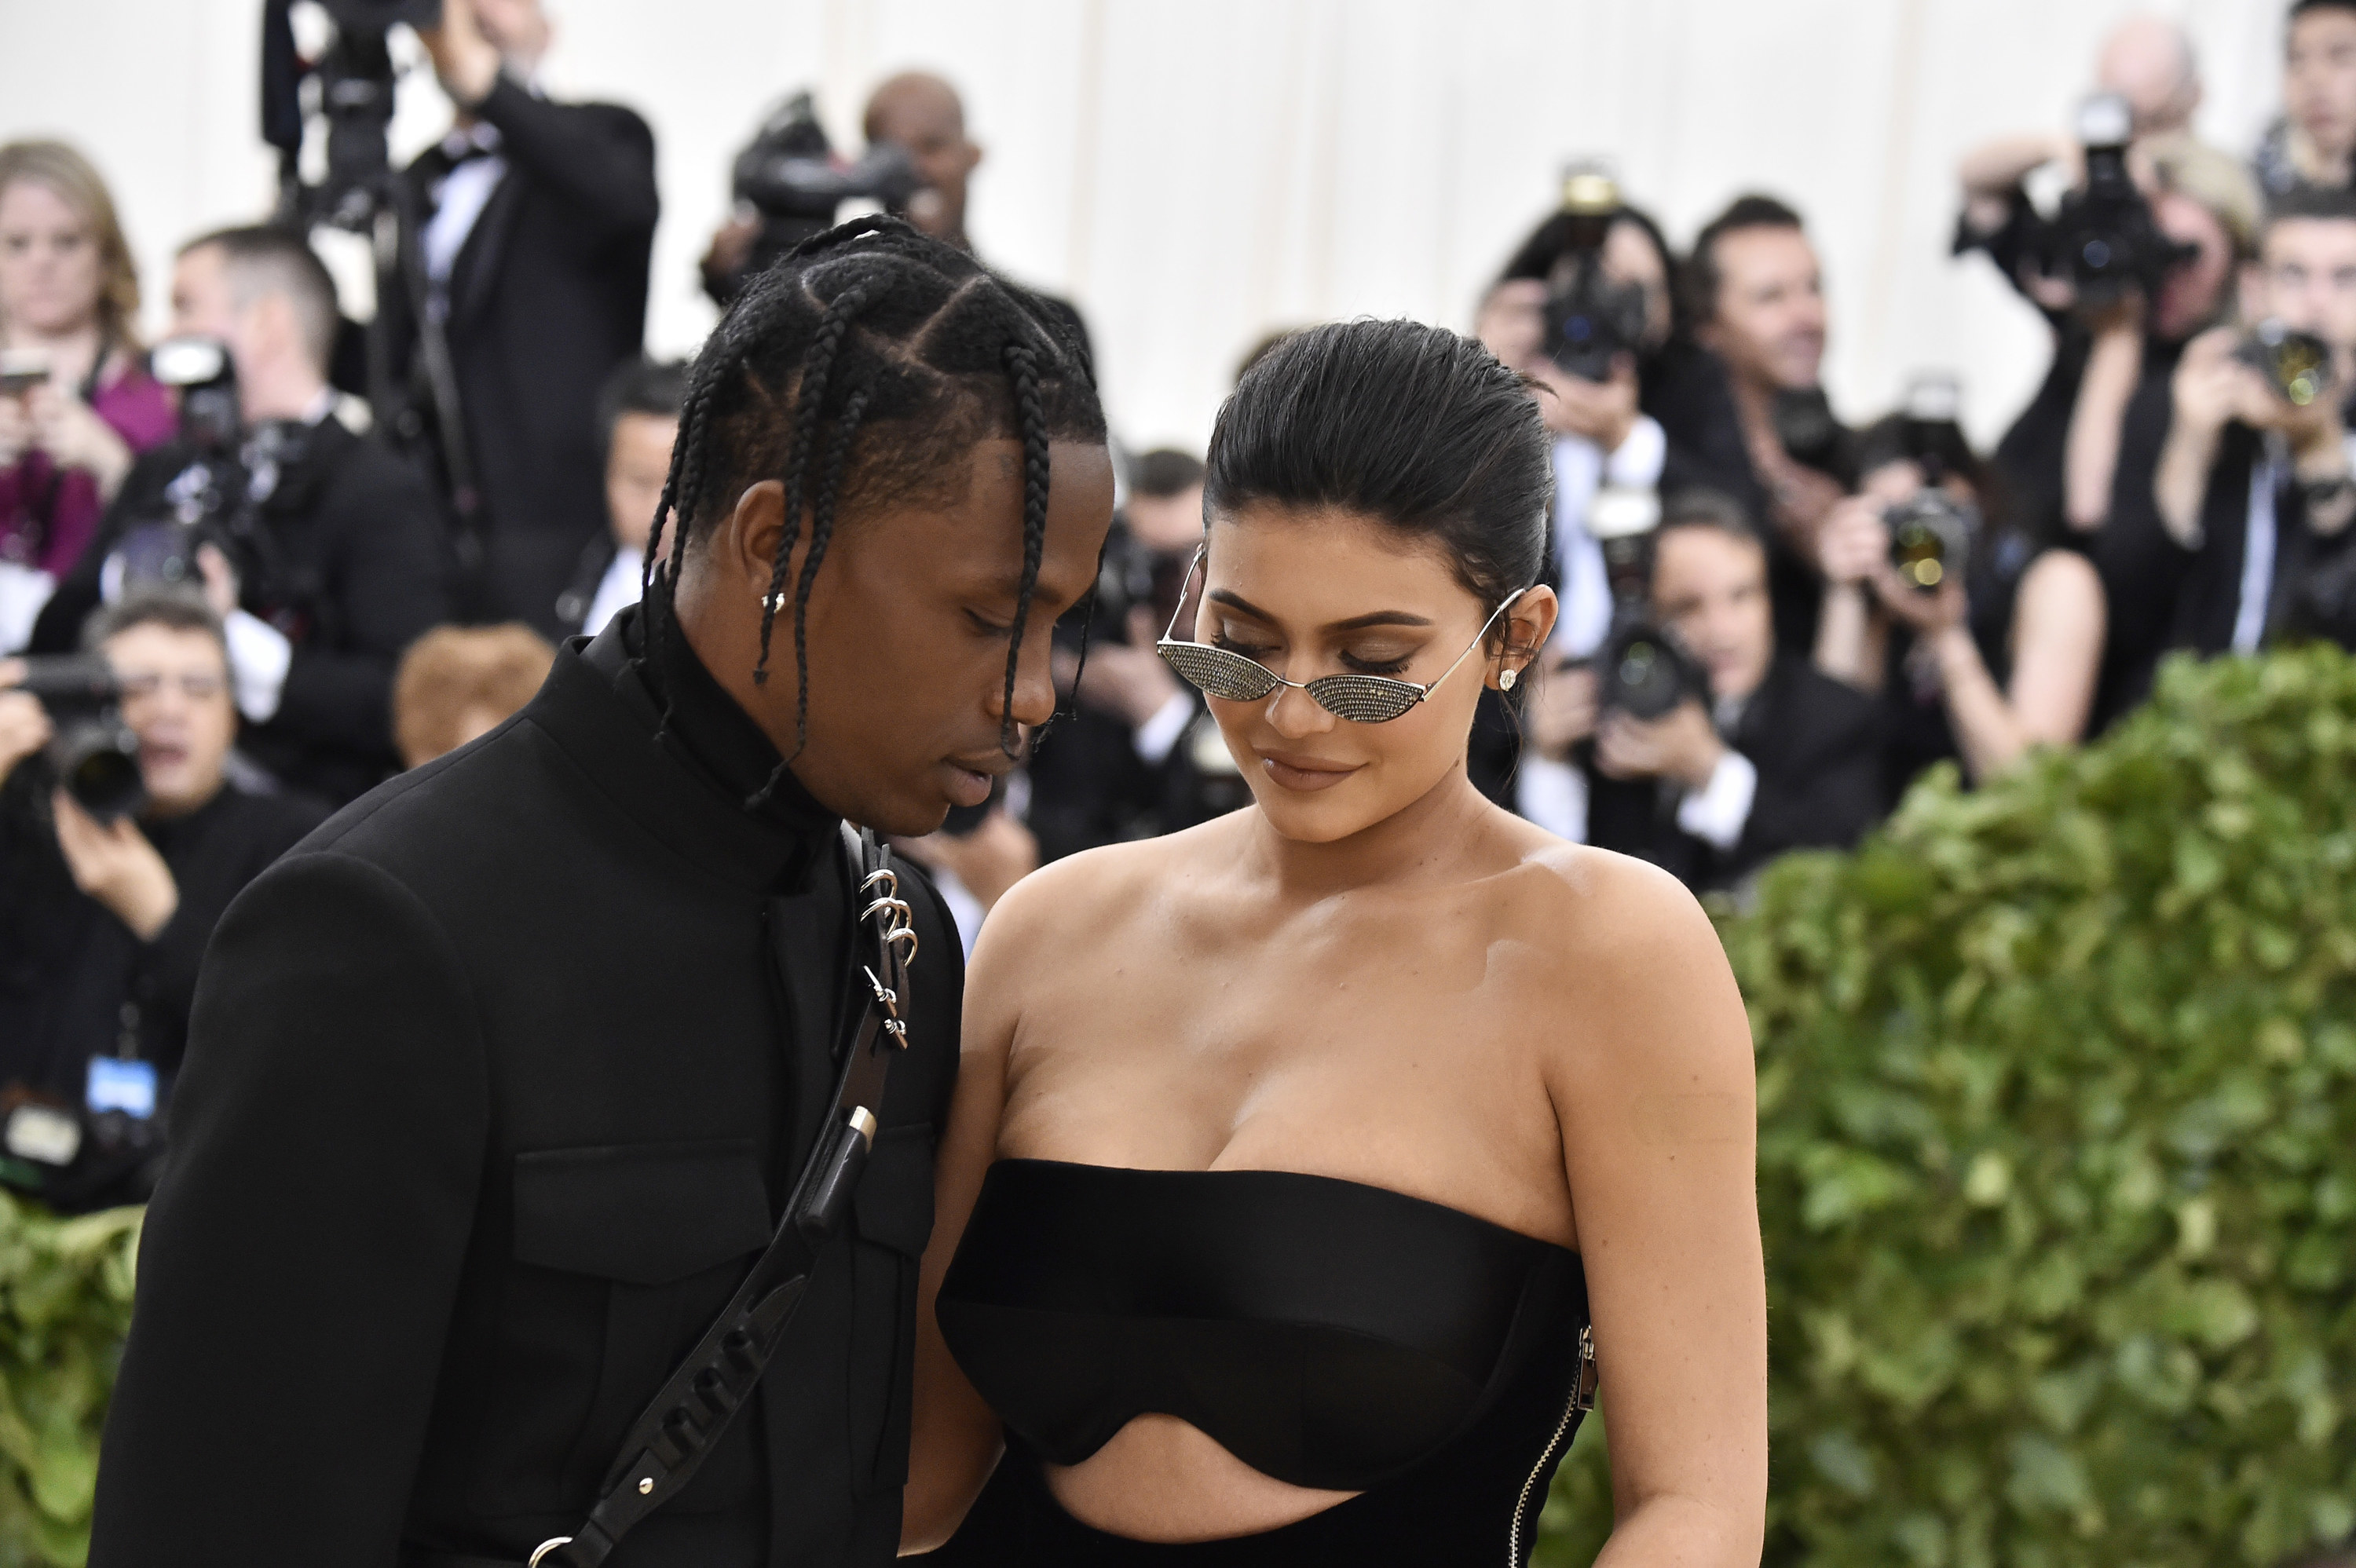 Travis Scott and Kylie Jenner attend the Heavenly Bodies: Fashion &amp; The Catholic Imagination Costume Institute Gala at The Metropolitan Museum of Art on May 7, 2018 in New York City.